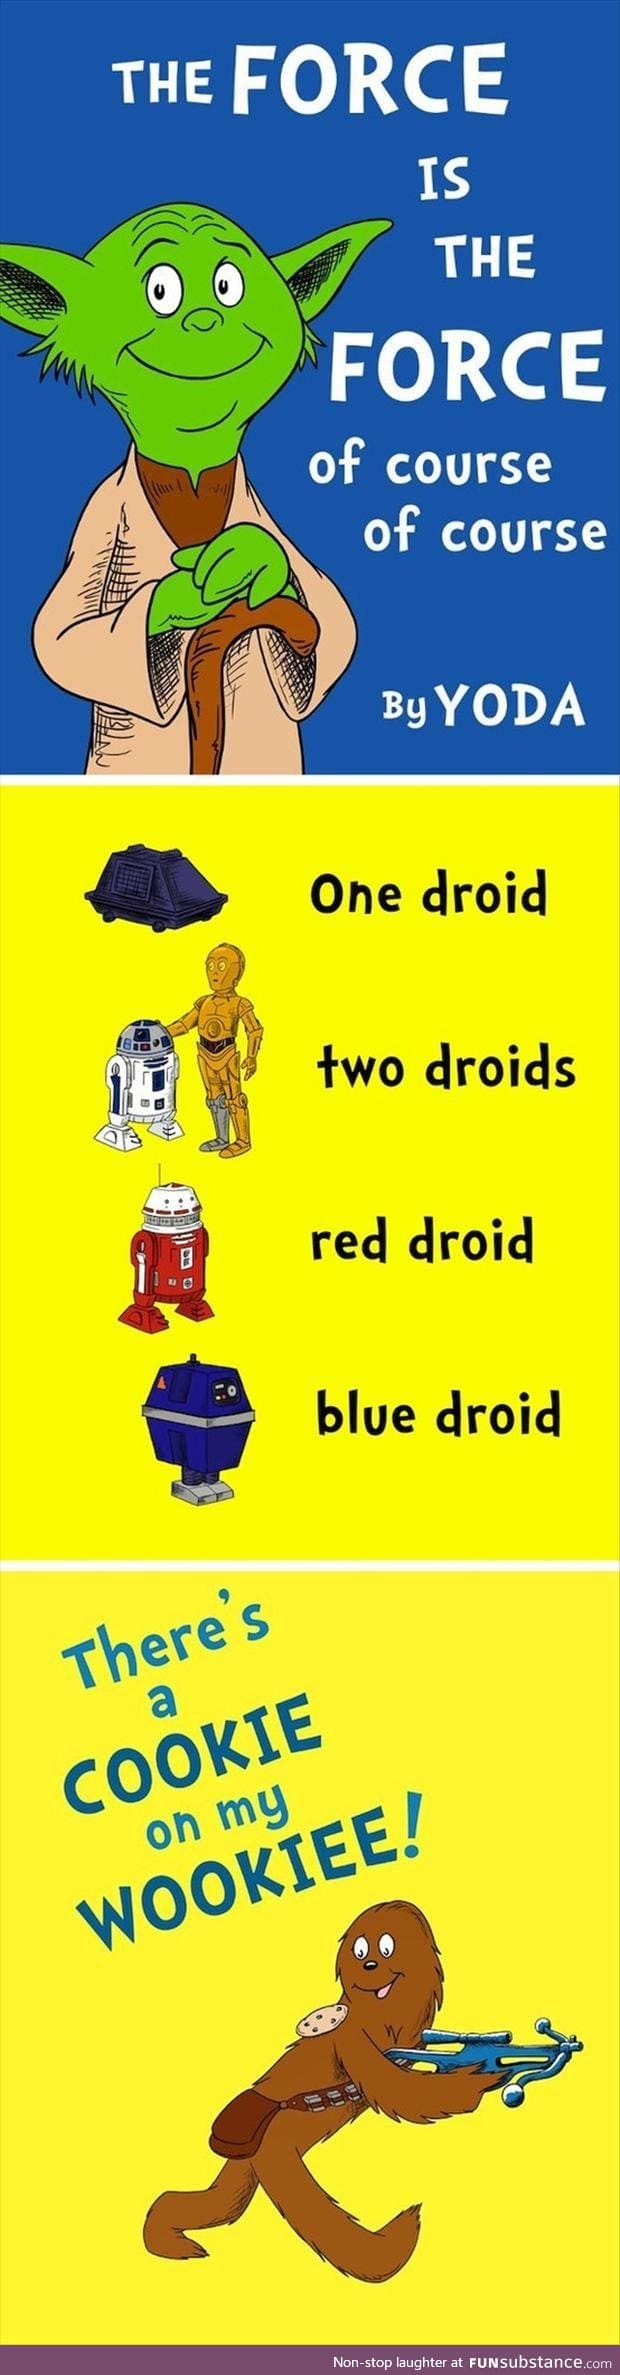 Shame Dr. Seuss didn't do Star Wars books, we might have gotten these gems.